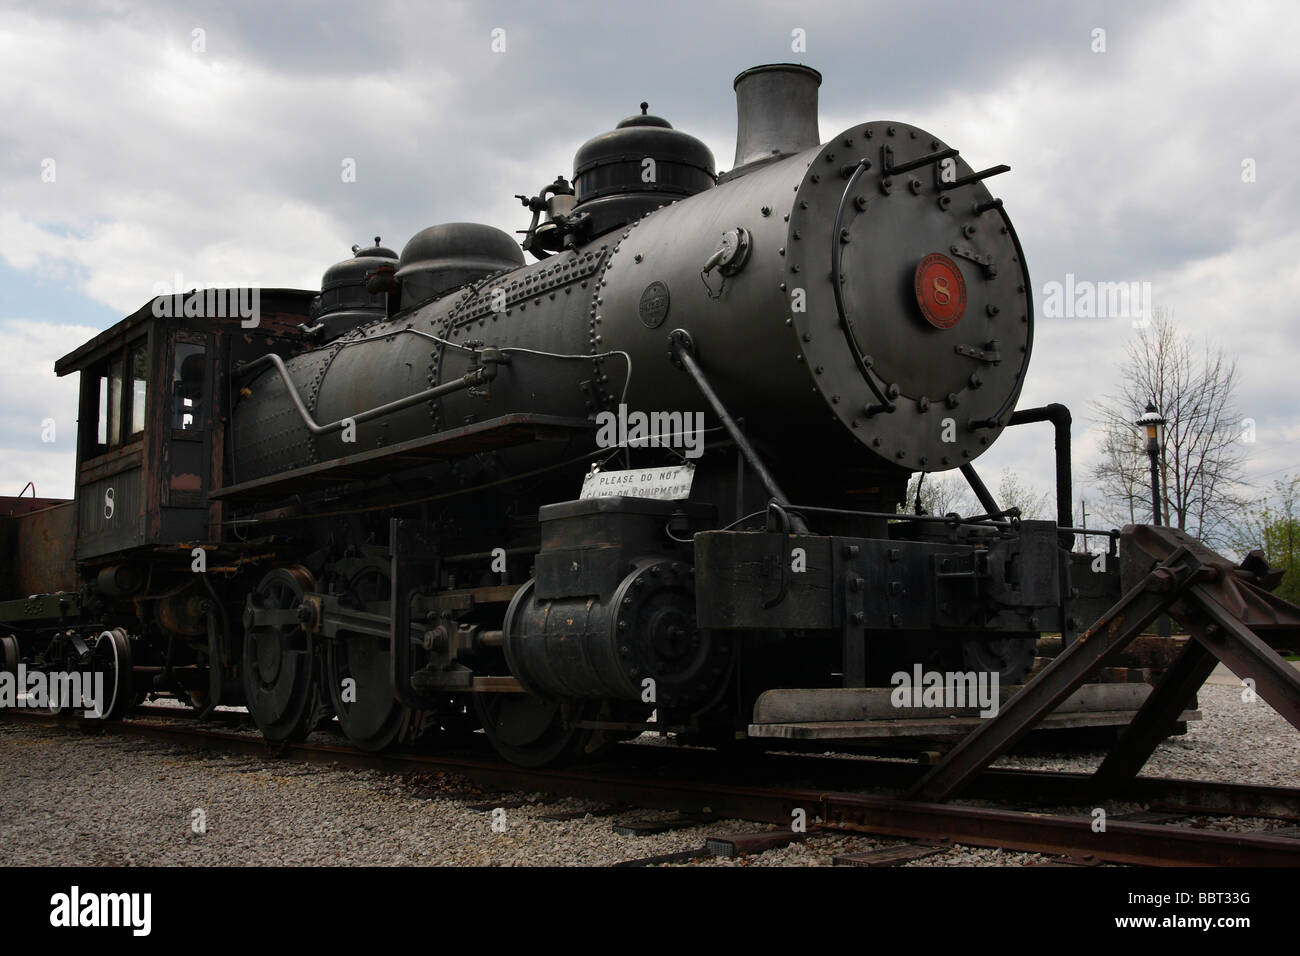 Historic power steam engine train locomotive USA historical re-enactment reenactment old vintage fashioned wallpapers wallpaper hi-res Stock Photo